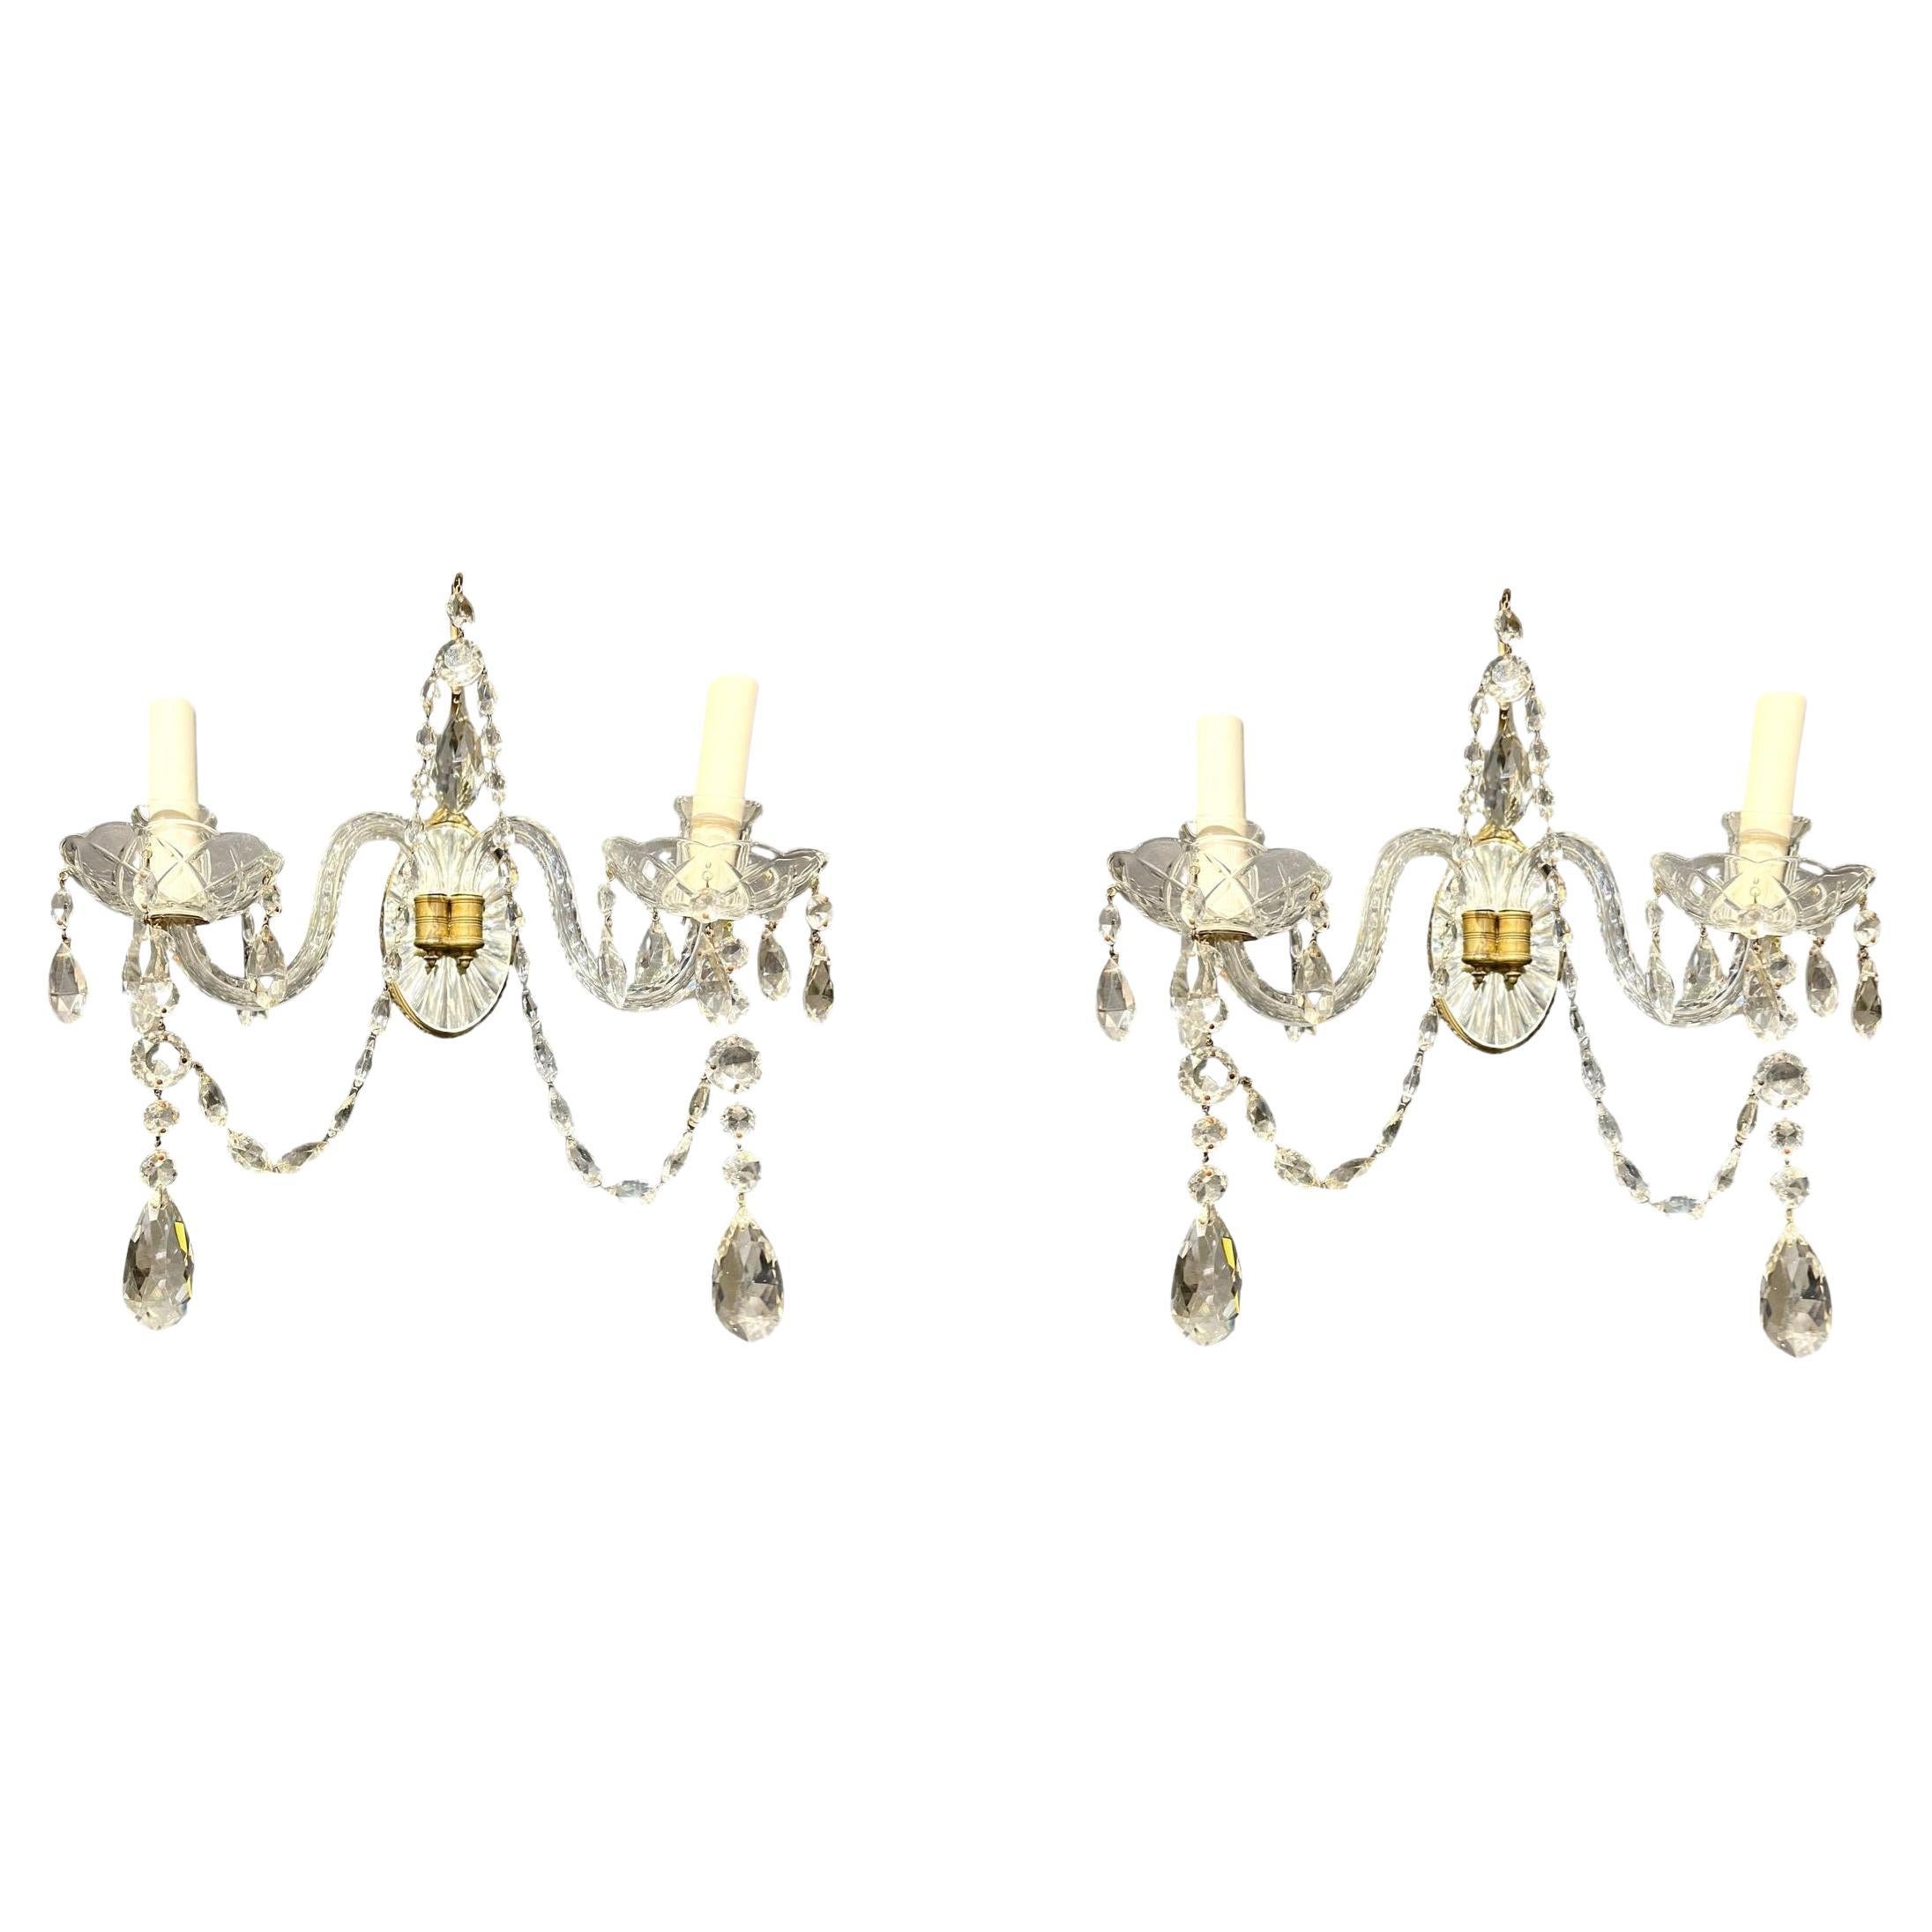 1920 Mirror and Crystal Glass 2 Lights Sconces